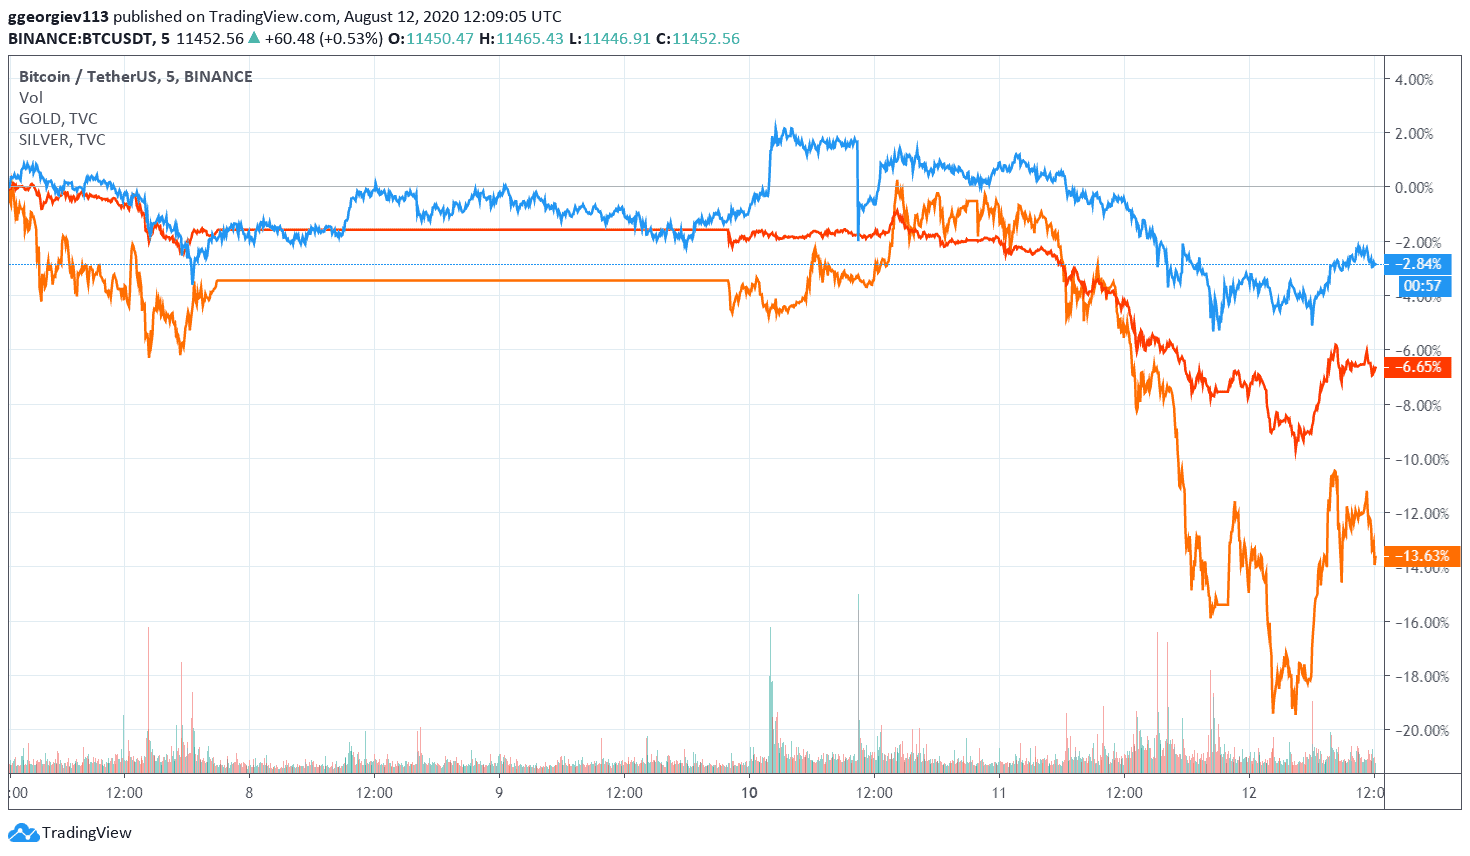 The Latest Bitcoin Price Crash Was Correlated With Gold and Silver’s Plunge